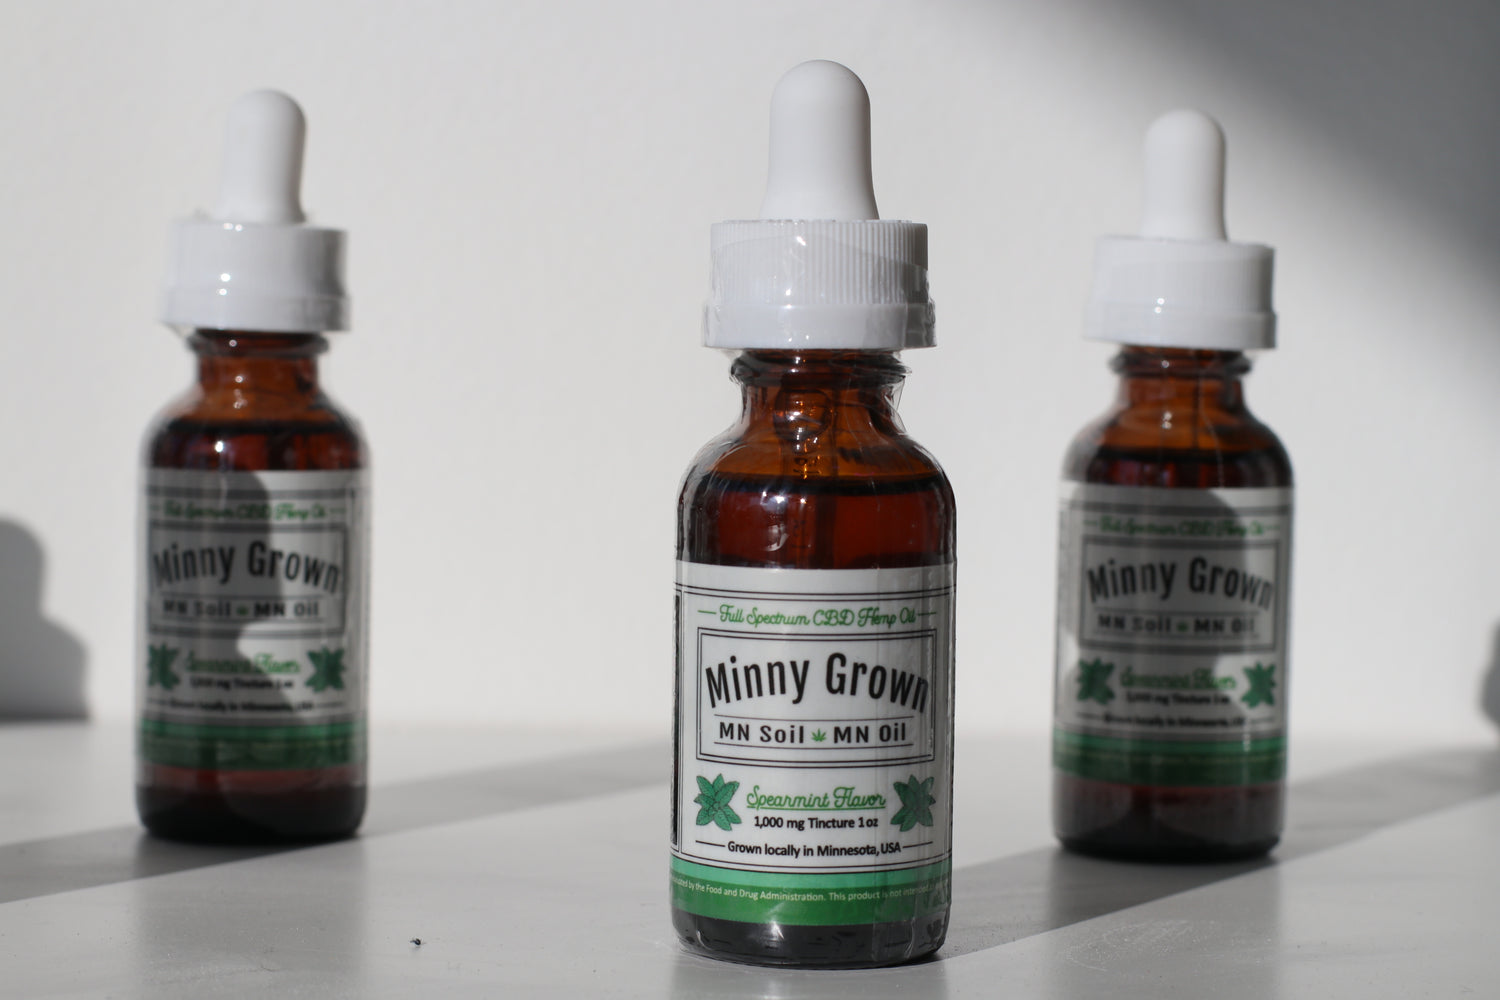 Just what makes CBD products and brands “craft,” anyhow?